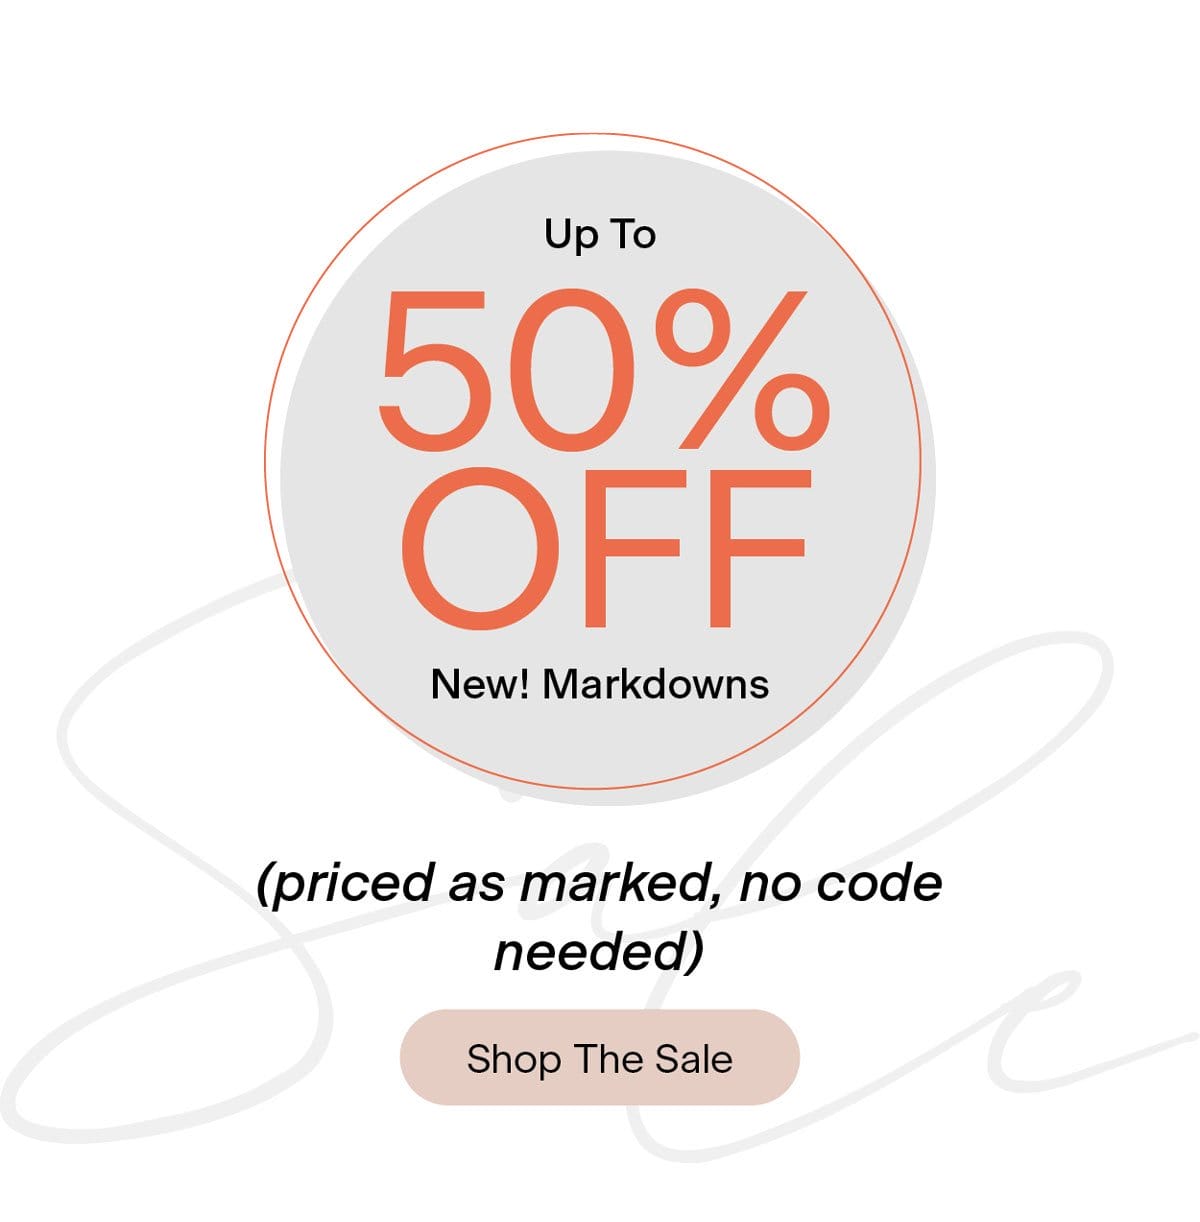 Get up to 50% OFF New Markdowns!\xa0Price as marked, no code needed.